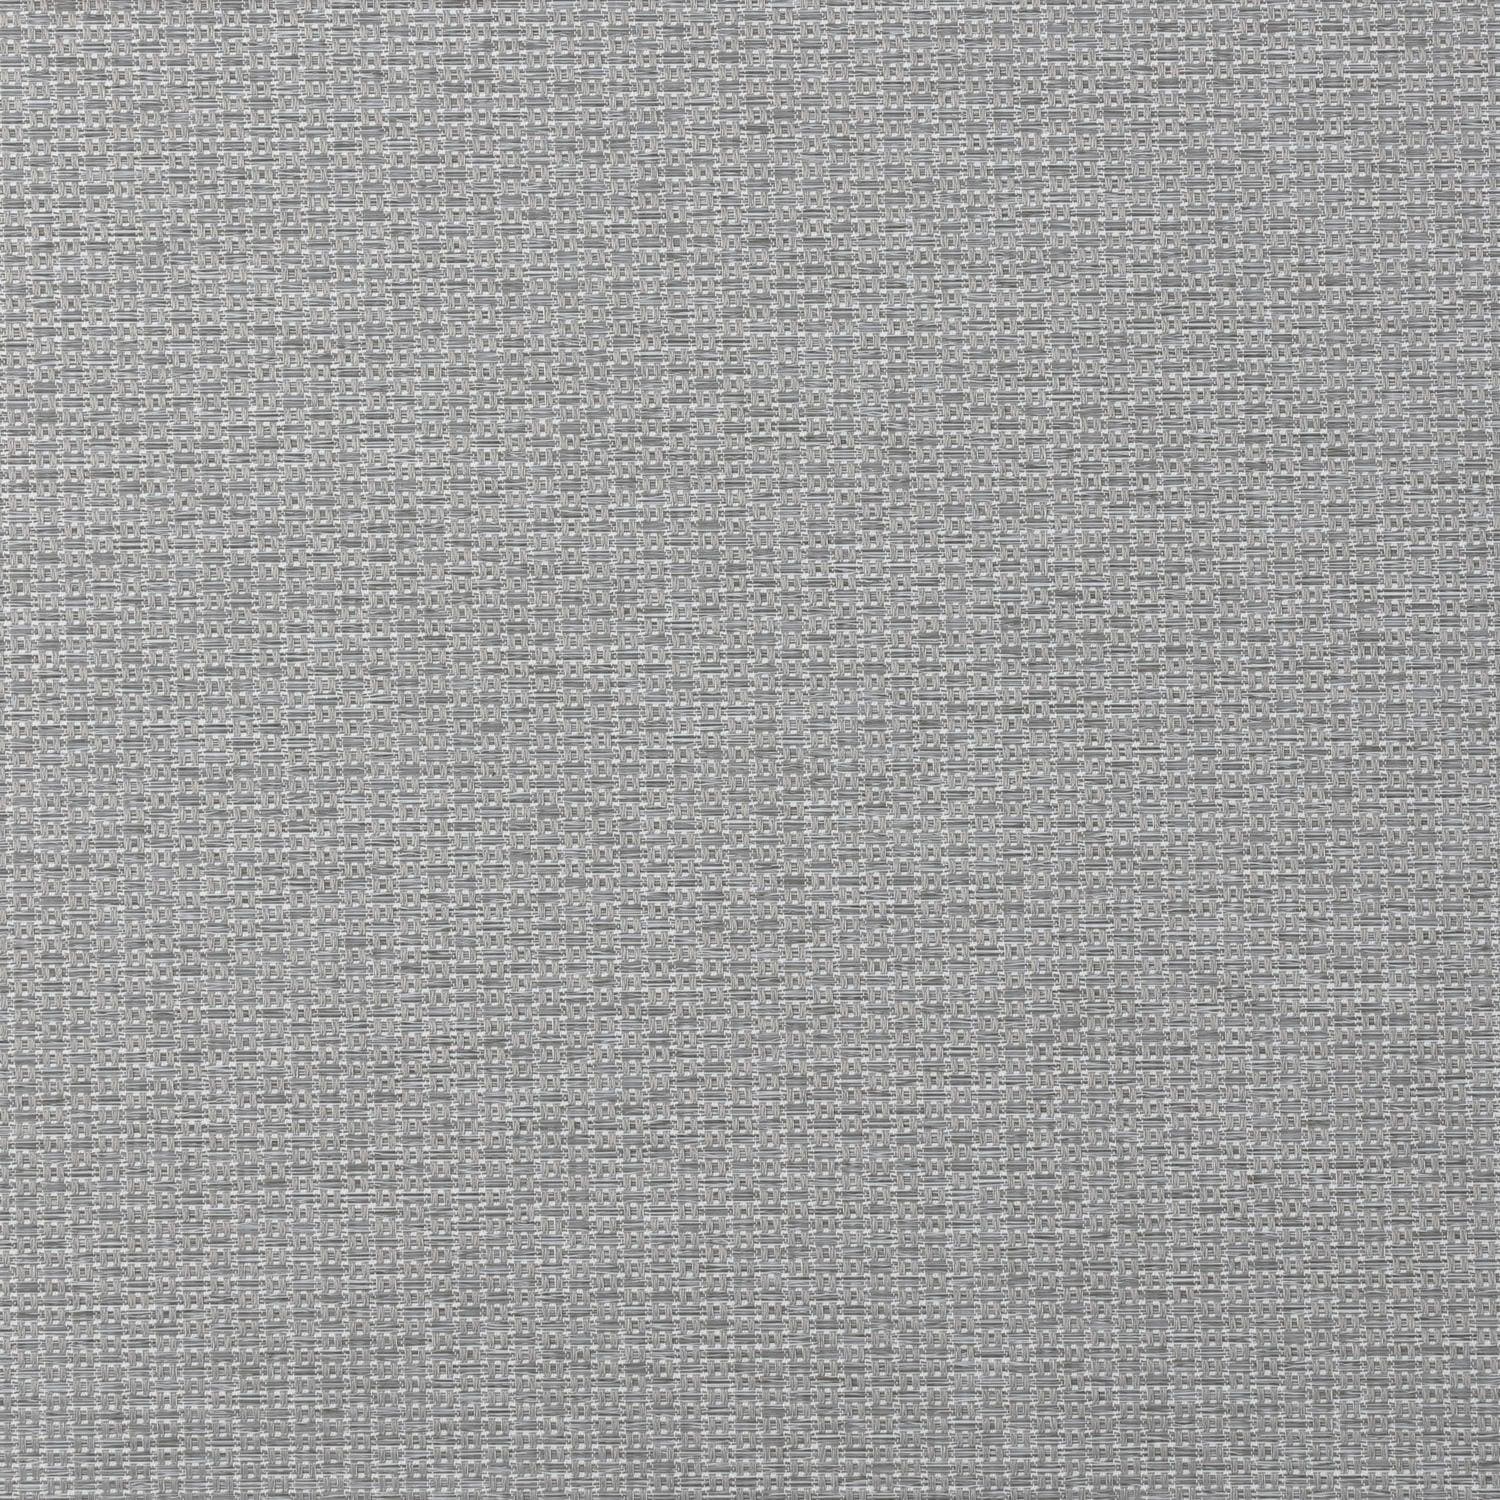 Rockland Silver BasketWeave Textured Blackout Roller Shade Swatch